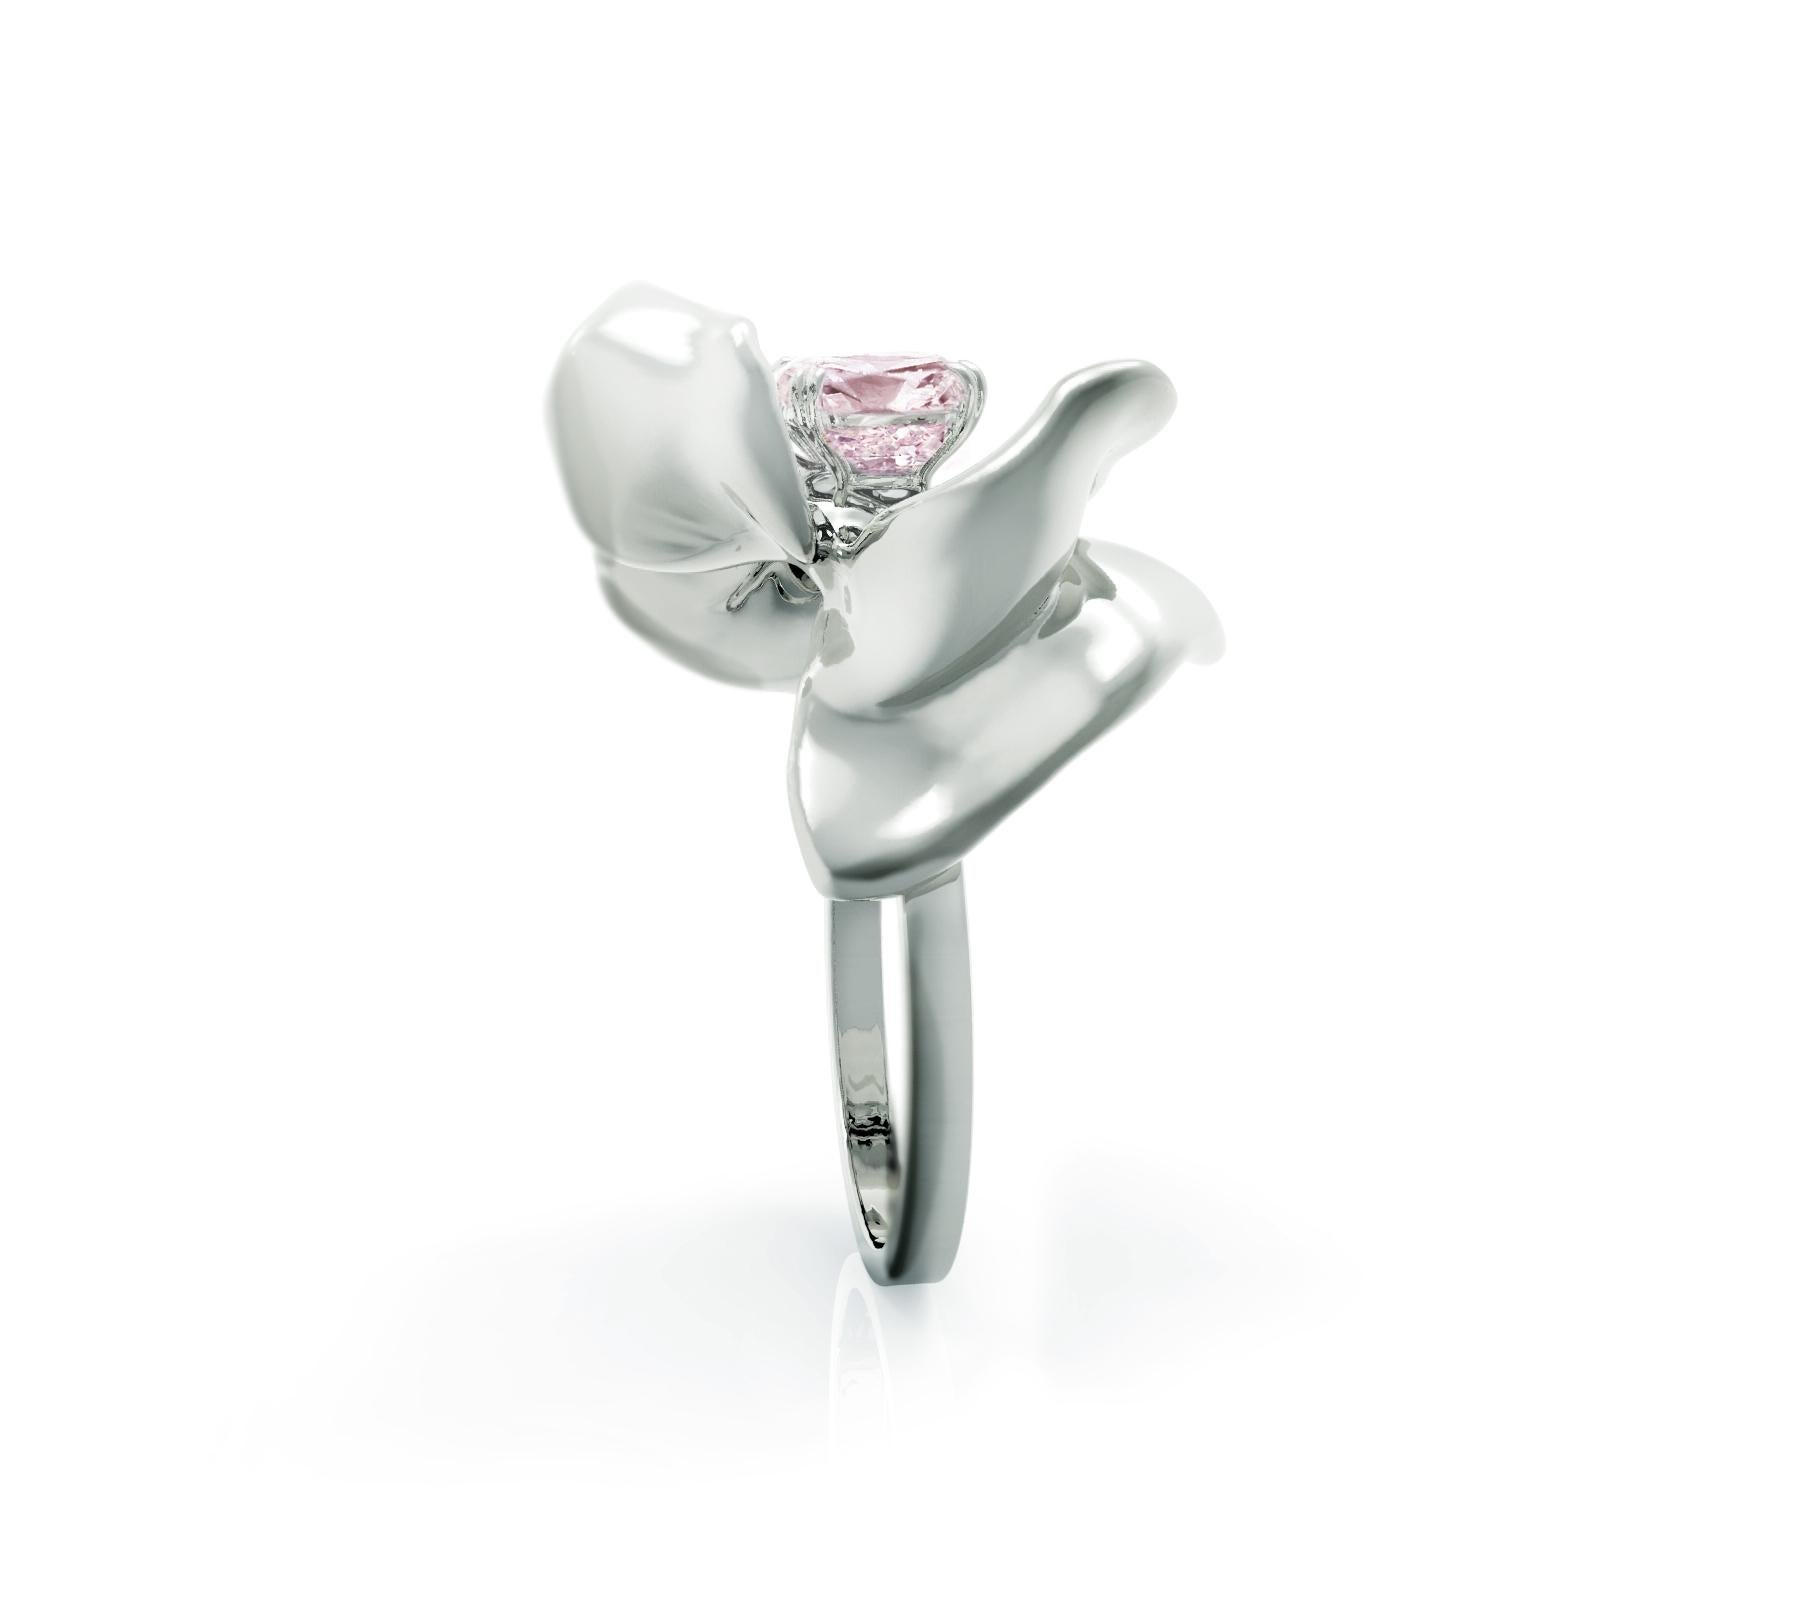 This contemporary cocktail ring features a Magnolia Flower design, crafted from sterling silver and adorned with amethyst. It was designed by oil painter Polya Medvedeva, who spent countless hours working in 3D to achieve the perfect final shape,